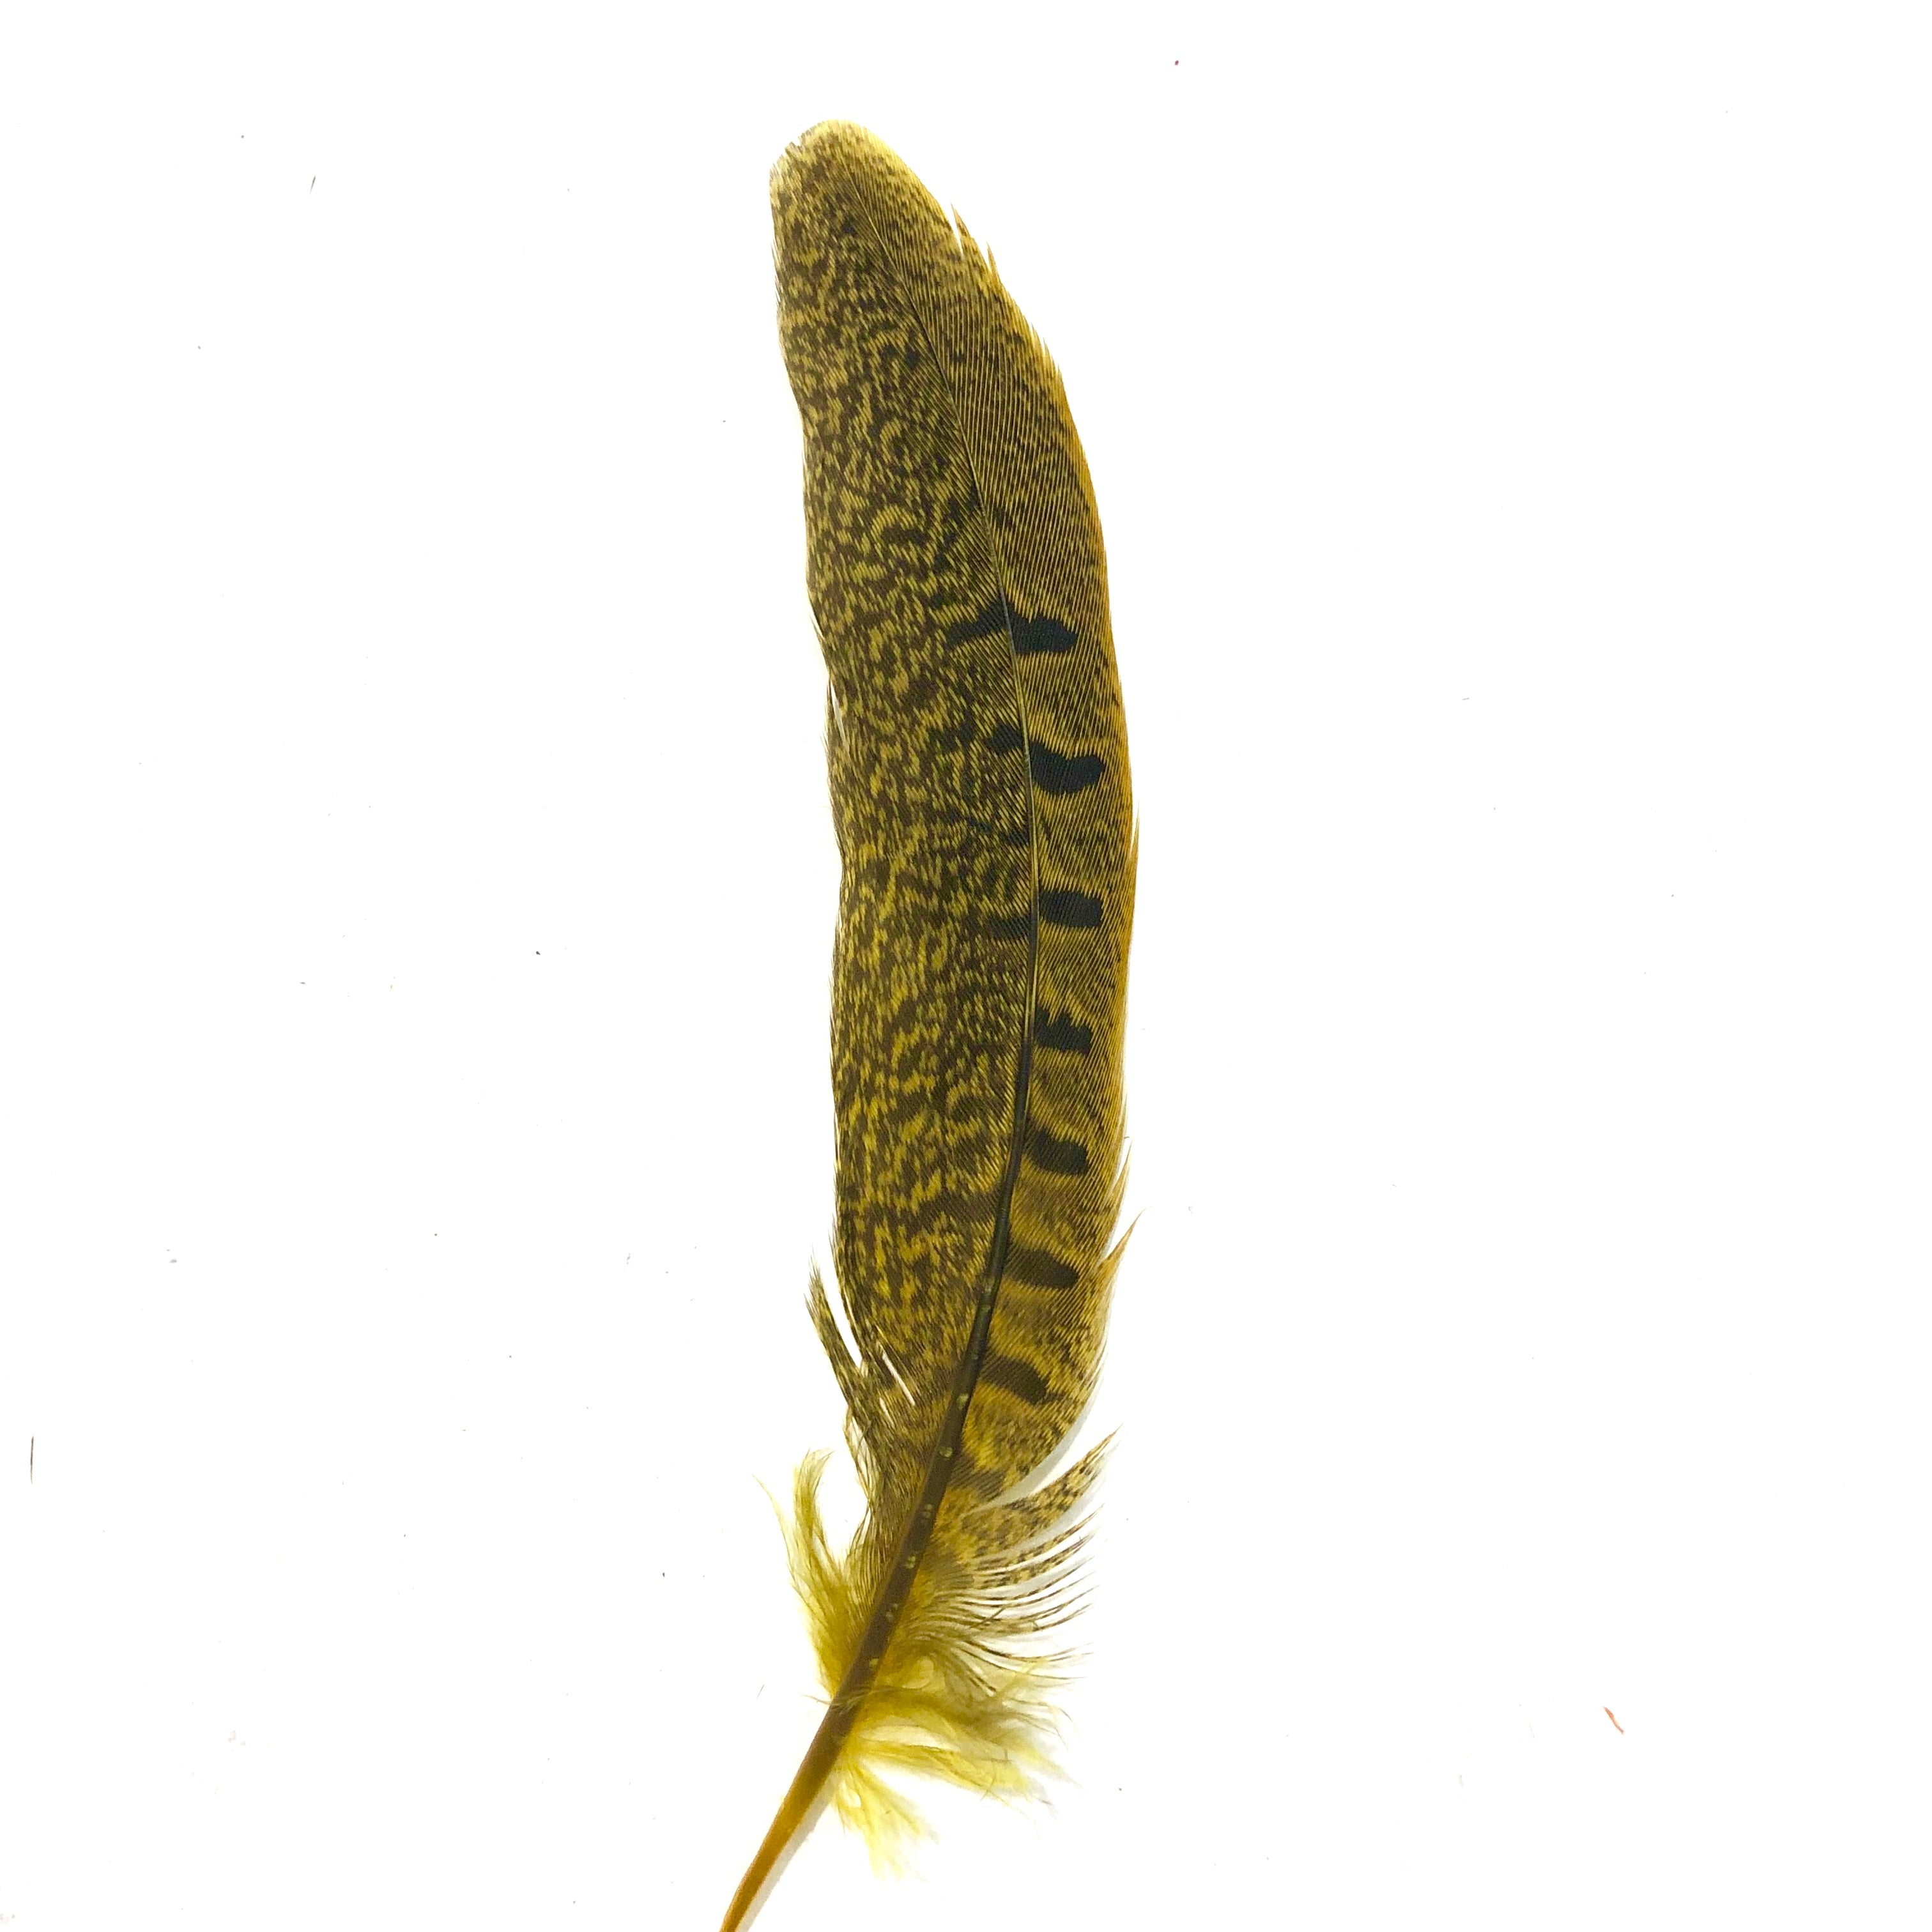 Under 6" Ringneck Pheasant Tail Feather x 10 pcs - Yellow